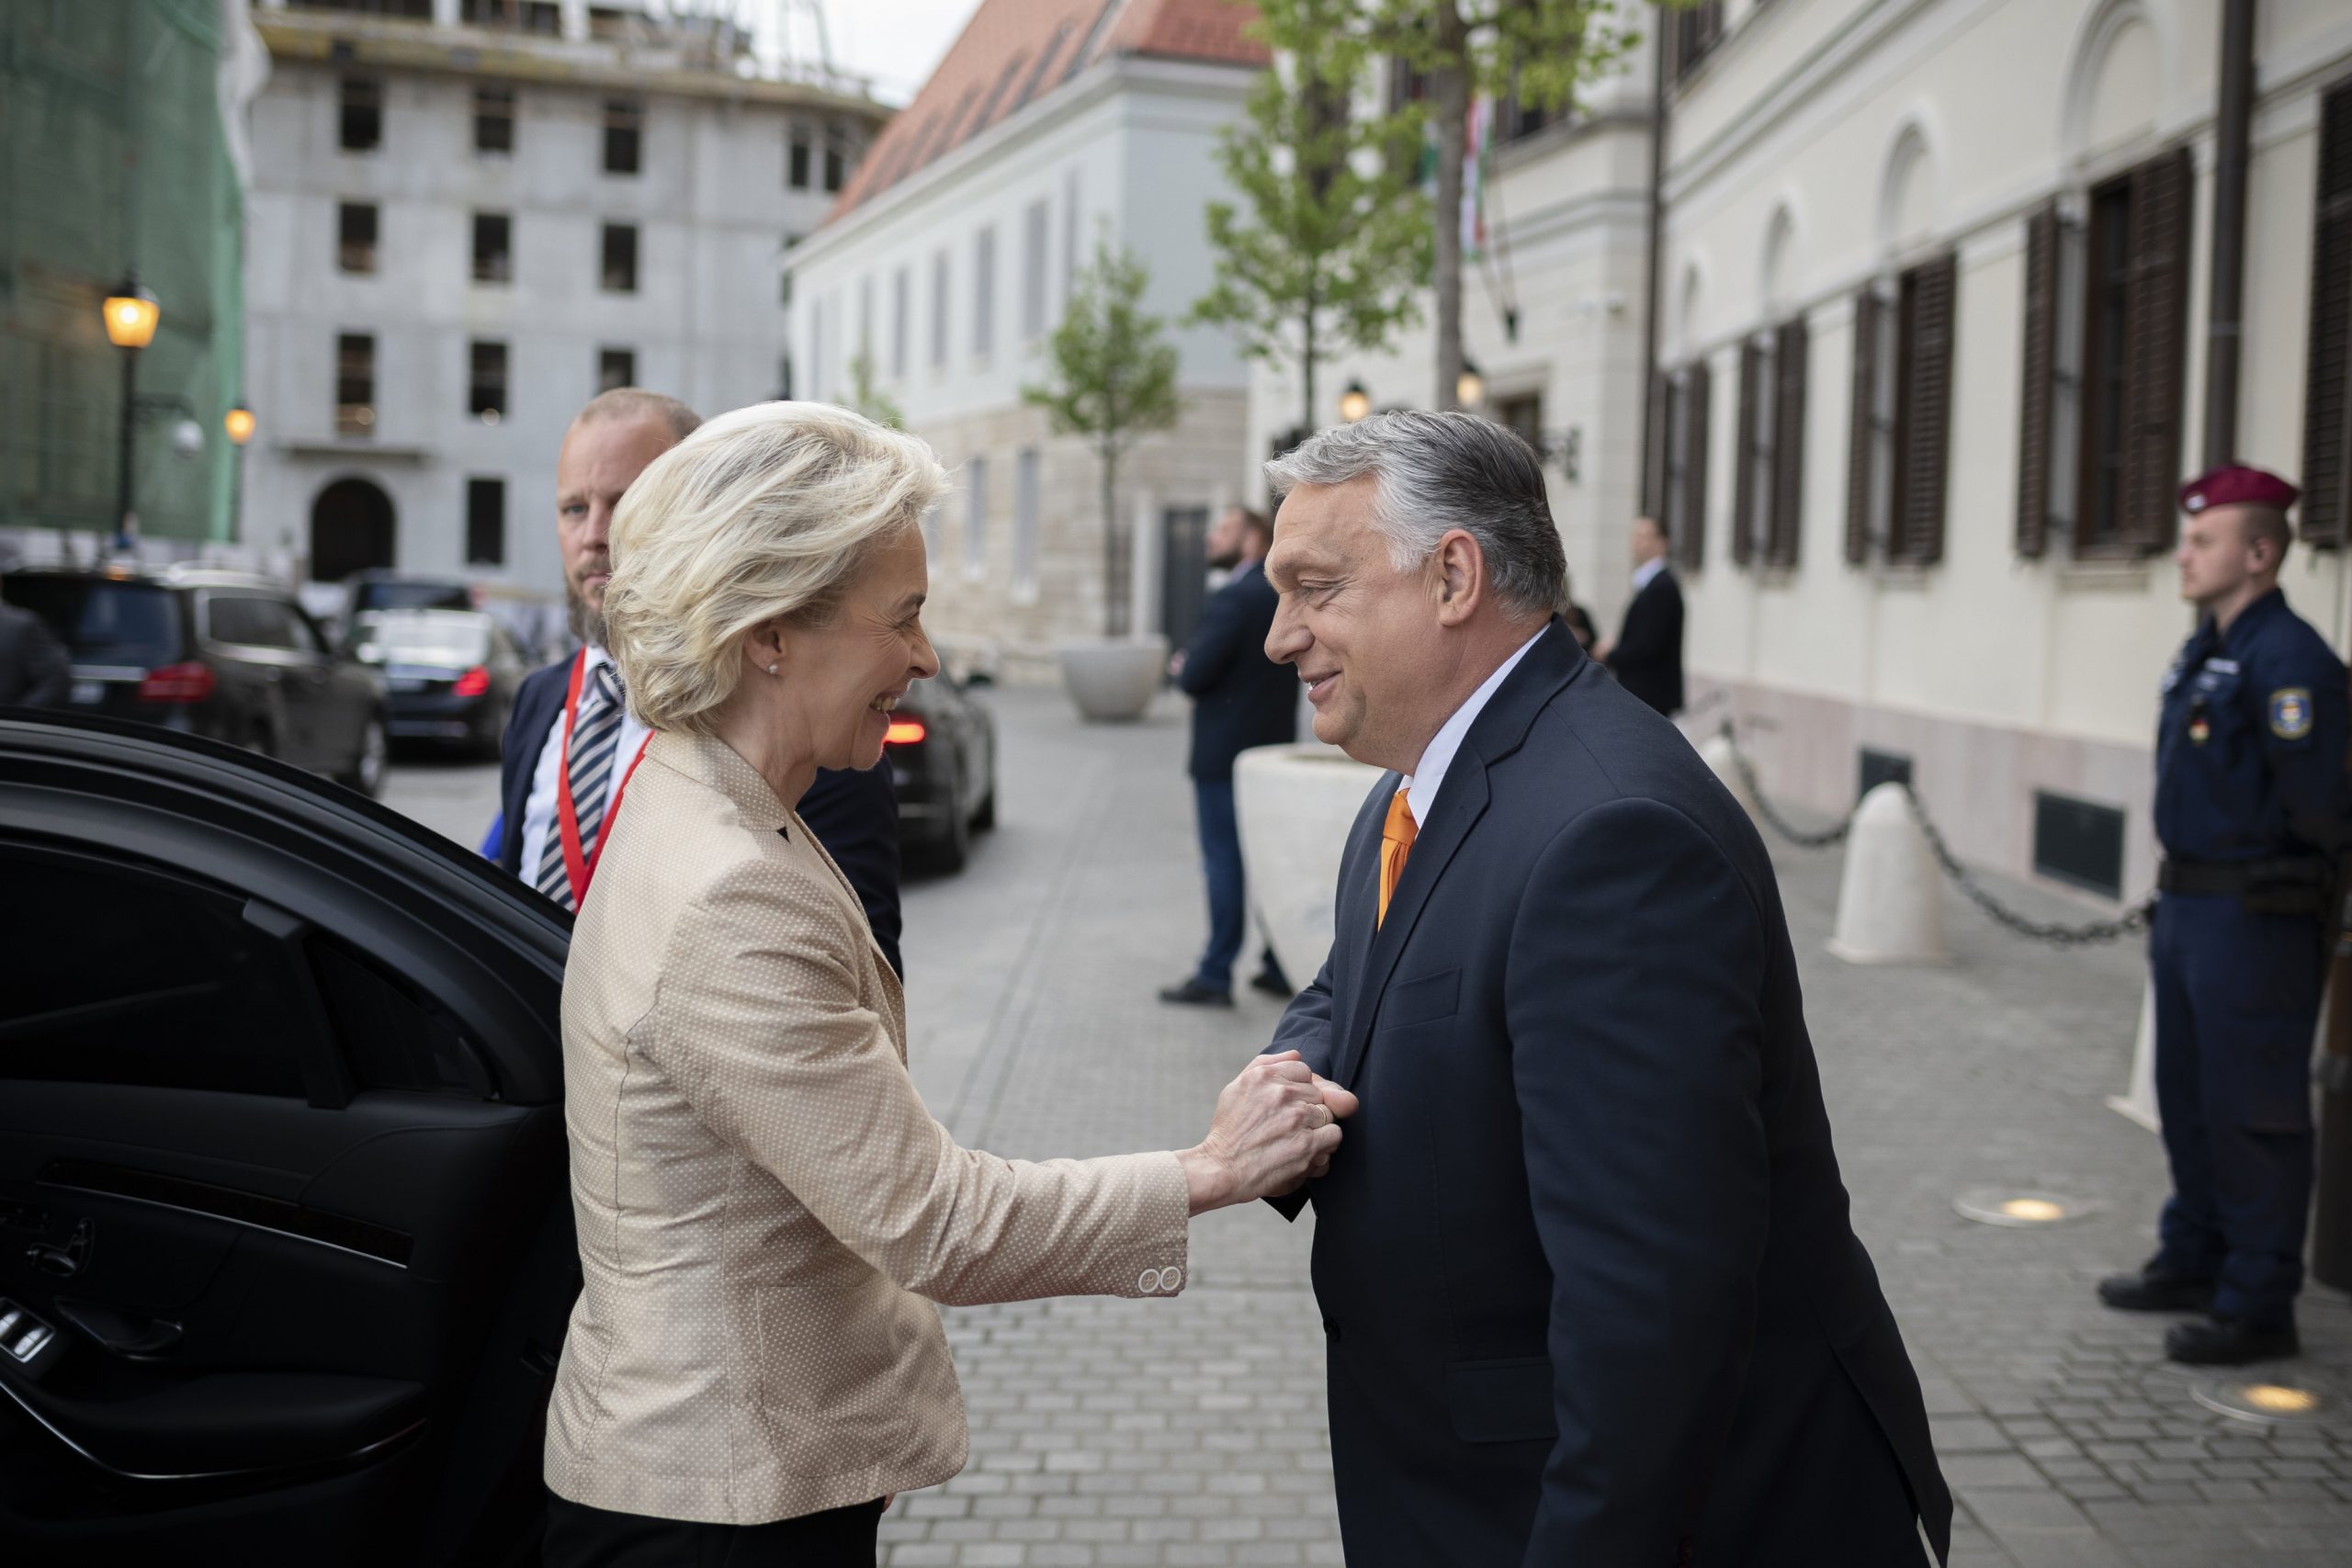 Politico: EU Leaders Consider Paying Hungarian Gov't to Support Oil Sanctions